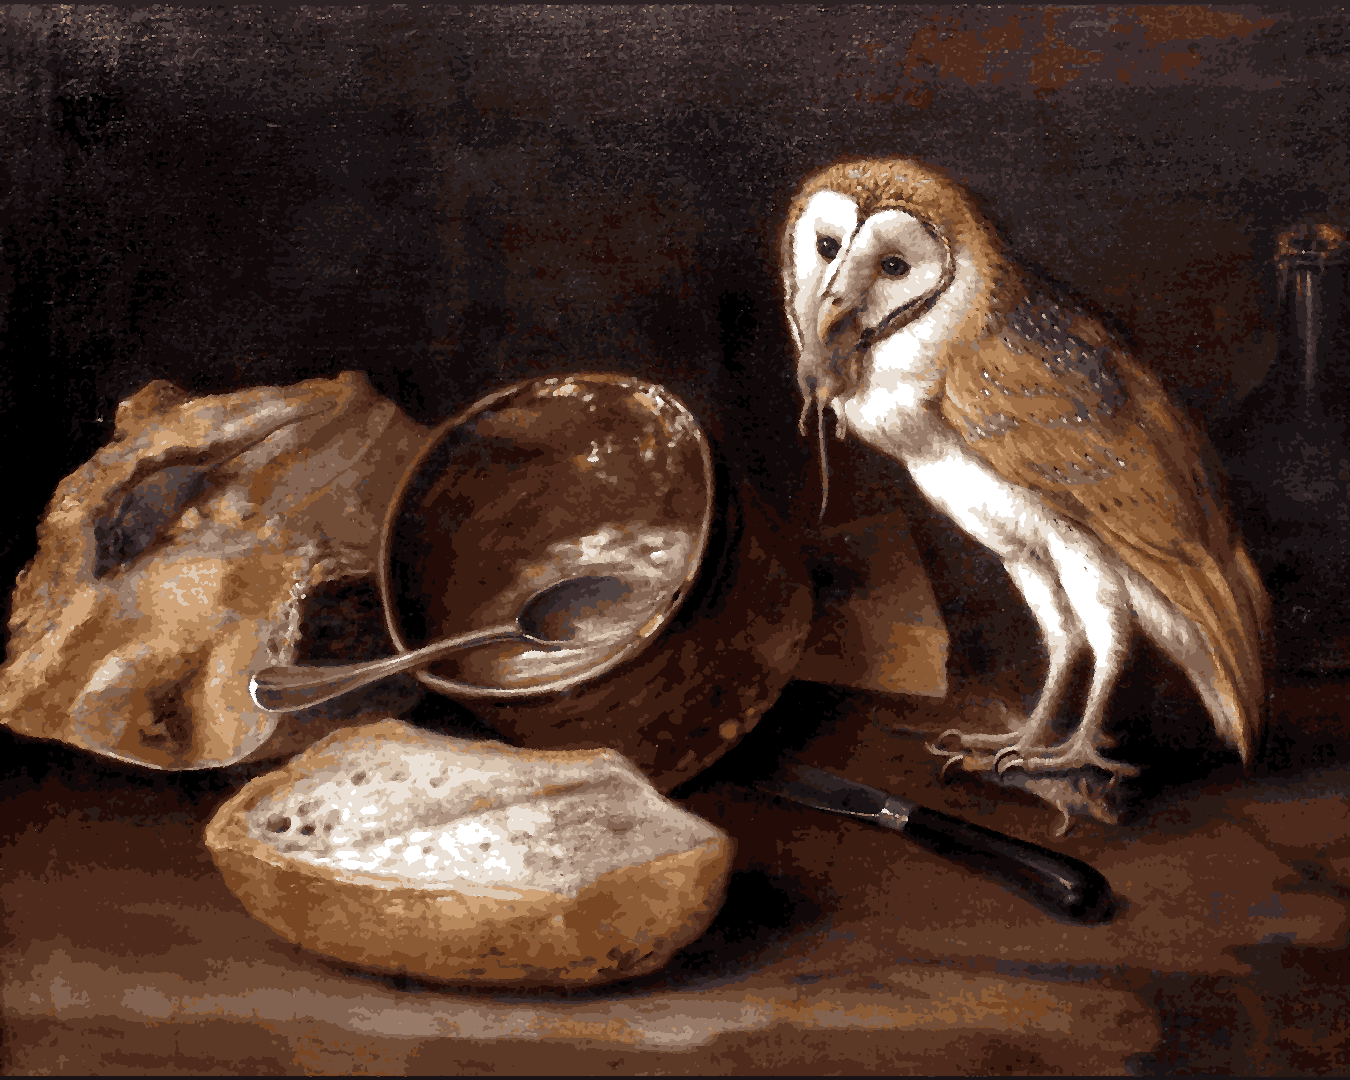 Owls Collection PD (14) - An Owl’s Lunch by George William Sartorius - Van-Go Paint-By-Number Kit